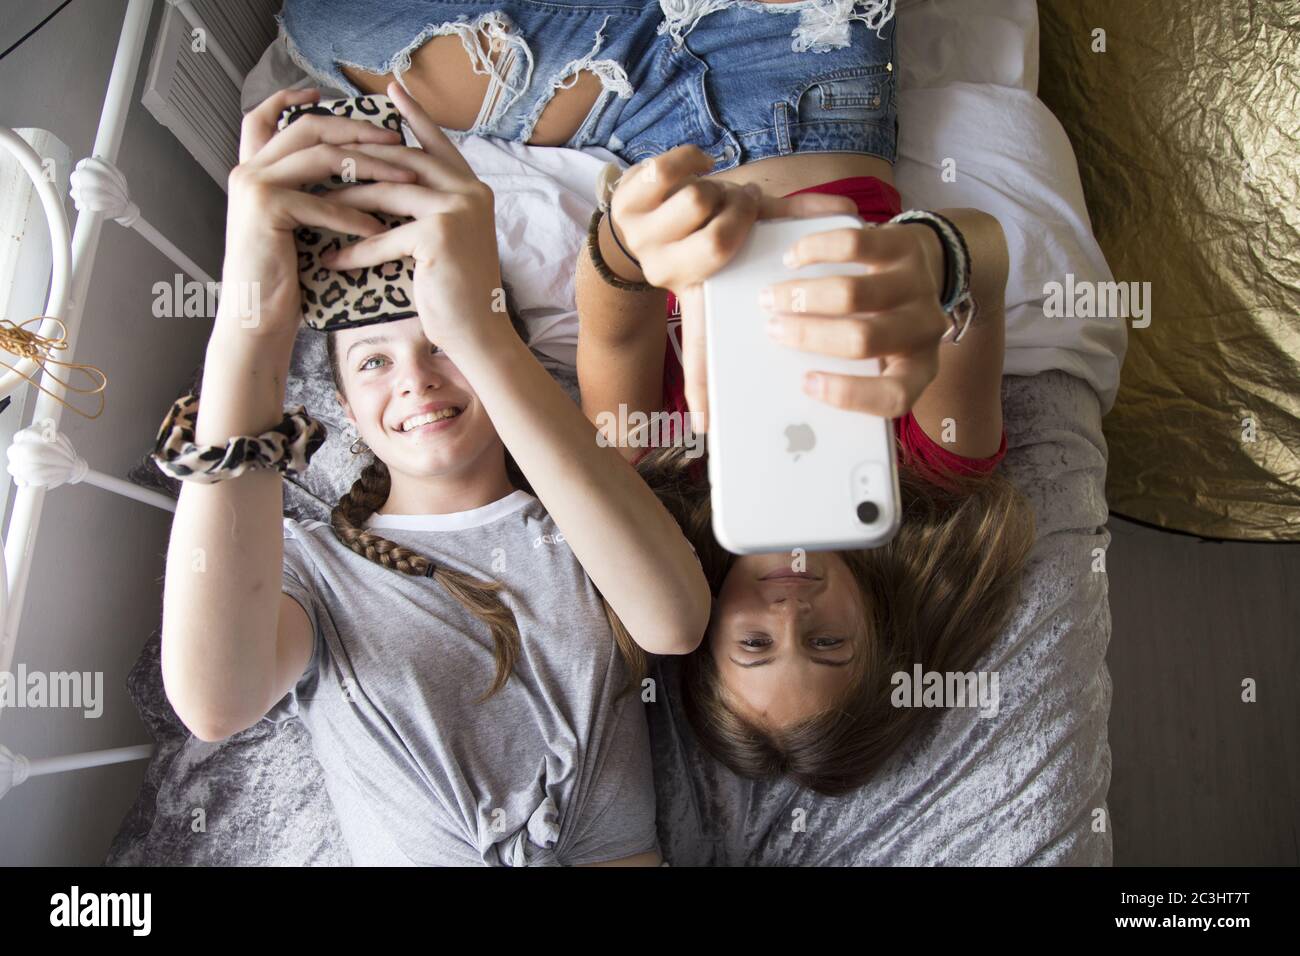 CANTERBURY, UNITED KINGDOM - Aug 29, 2019: Teenage Girls, Best friends hanging out but spending all of their time on their phones. Stock Photo